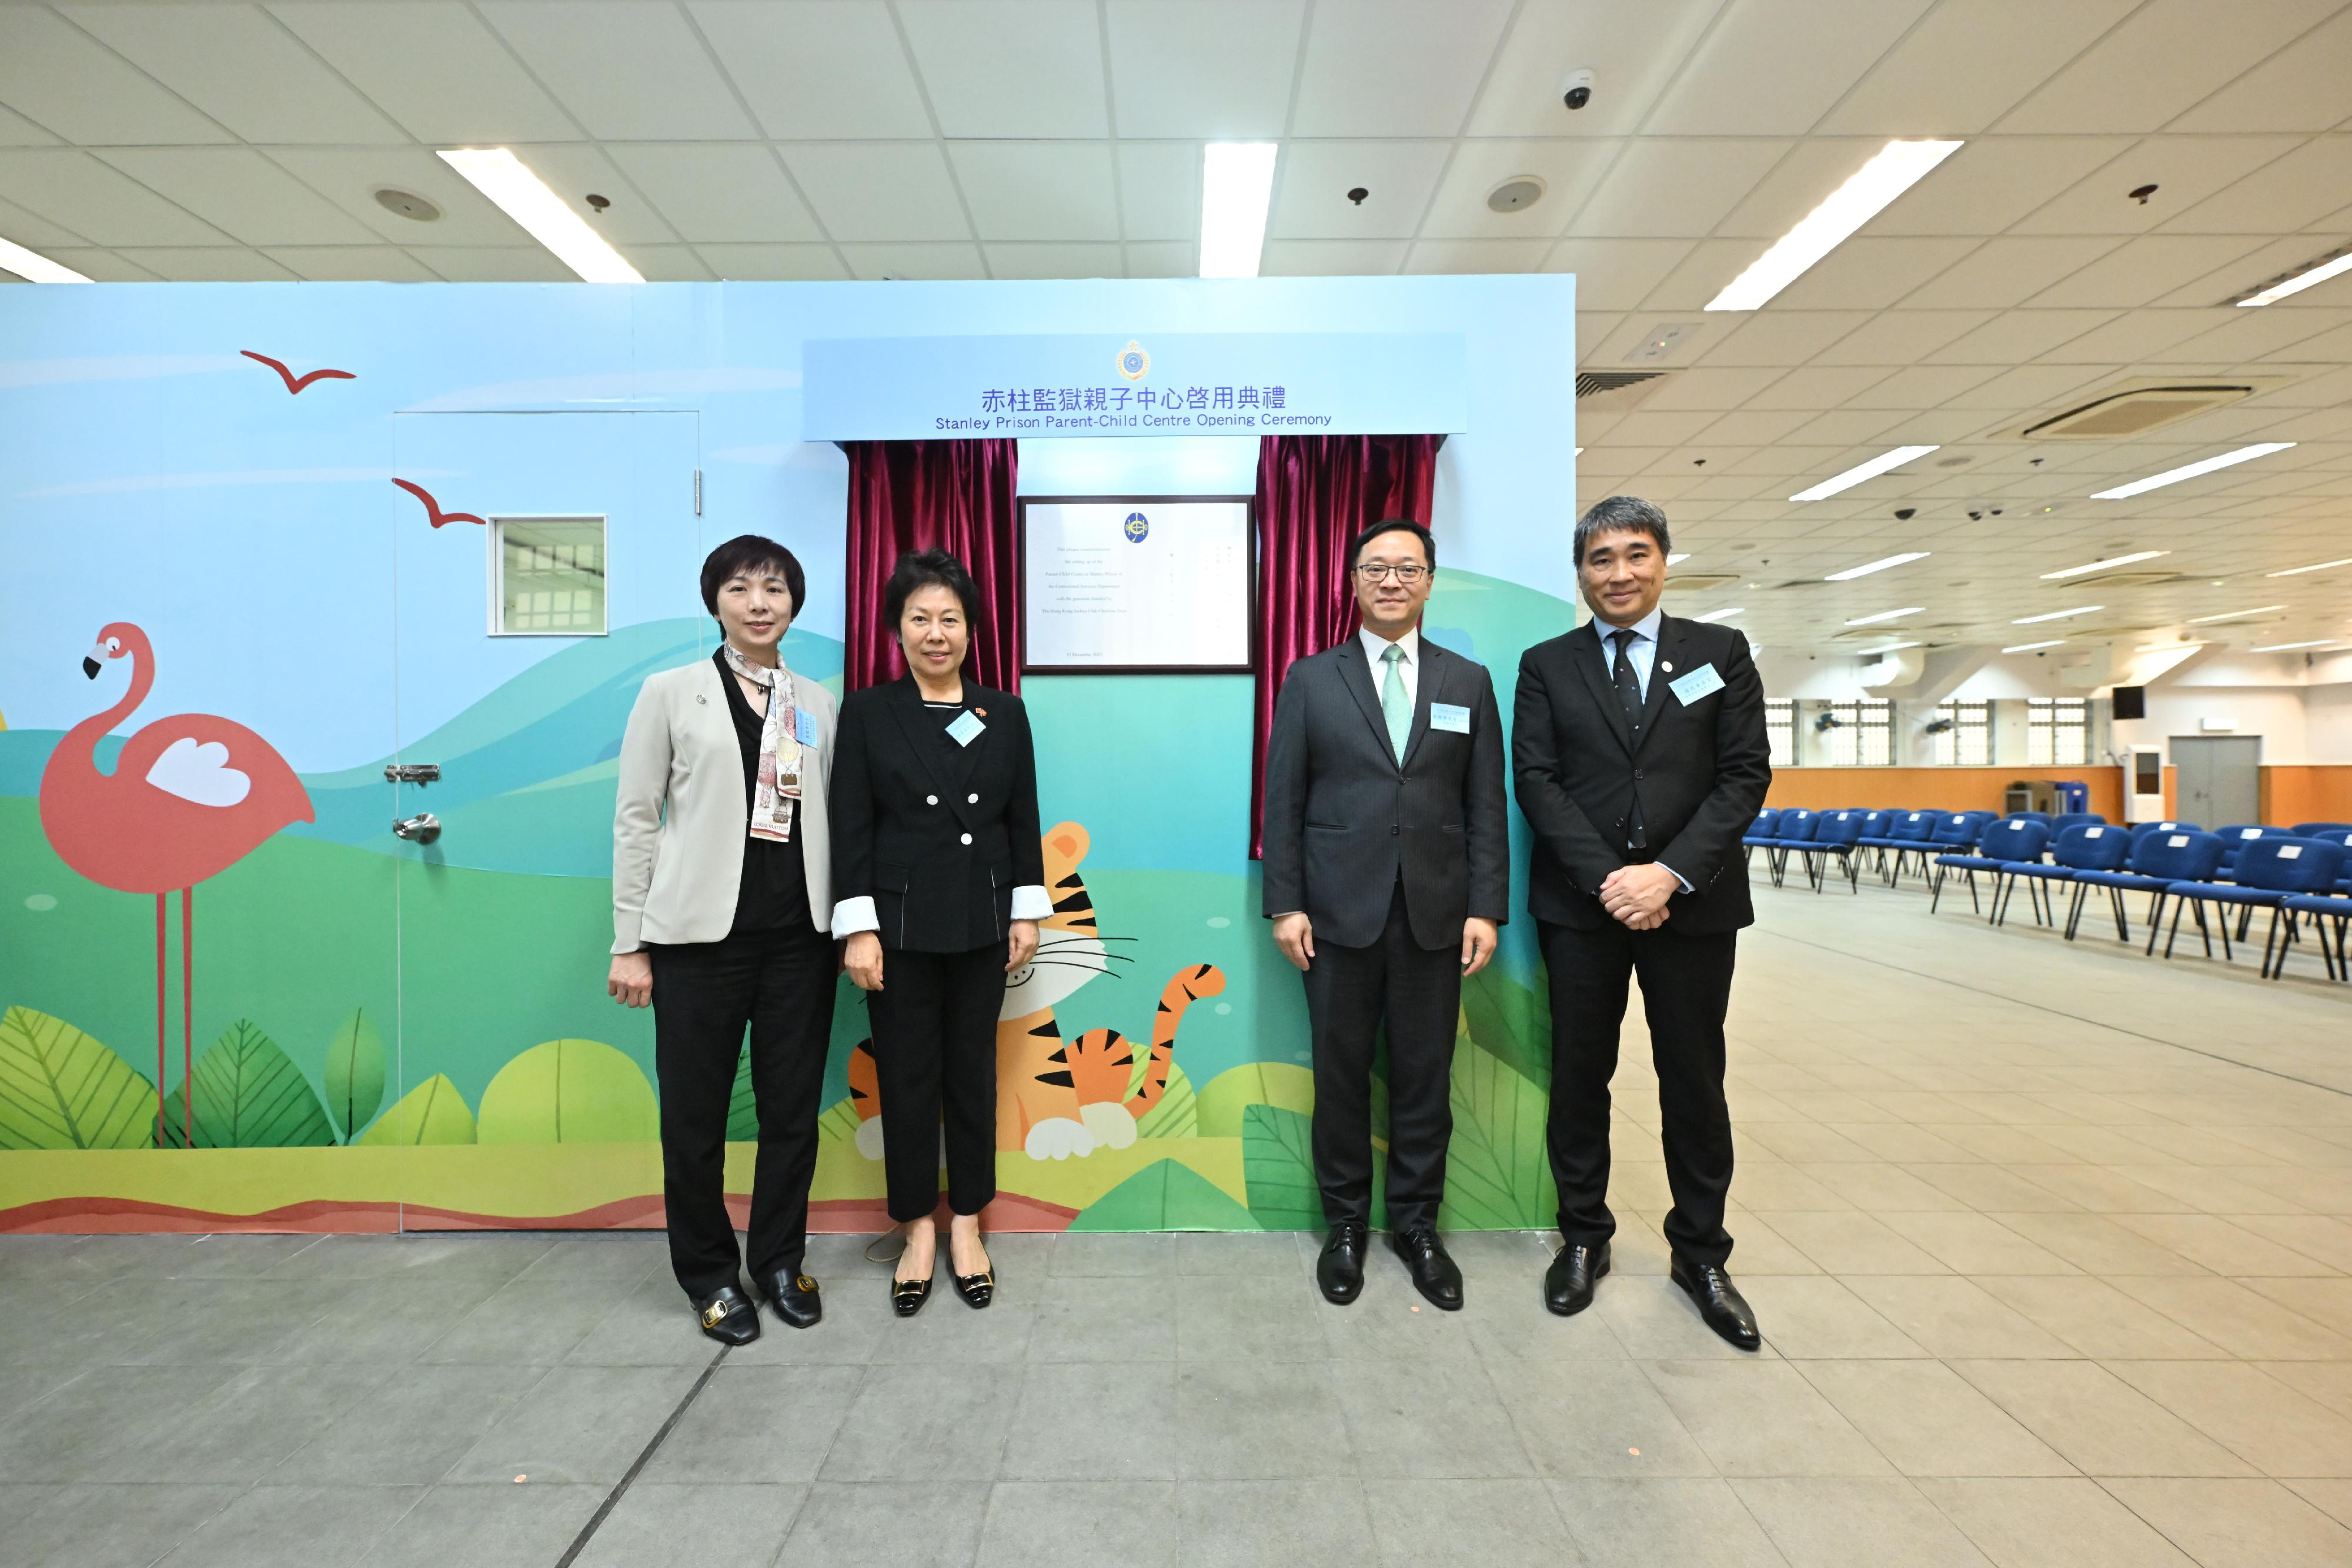 The Correctional Services Department officially launched a Parent-child Centre in Stanley Prison today (December 13). Photo shows the Chairman of the Committee on Community Support for Rehabilitated Offenders, Ms Tsui Li (second left); the Chairperson of the Executive Committee of the Society of Rehabilitation and Crime Prevention, Hong Kong, Mr Justice Poon Siu-tung (first right); the Head of Charities (Youth Development & Poverty Alleviation) of the Hong Kong Jockey Club, Ms Winnie Ying (first left); and the Commissioner of Correctional Services, Mr Wong Kwok-hing (second right), at the launching ceremony.